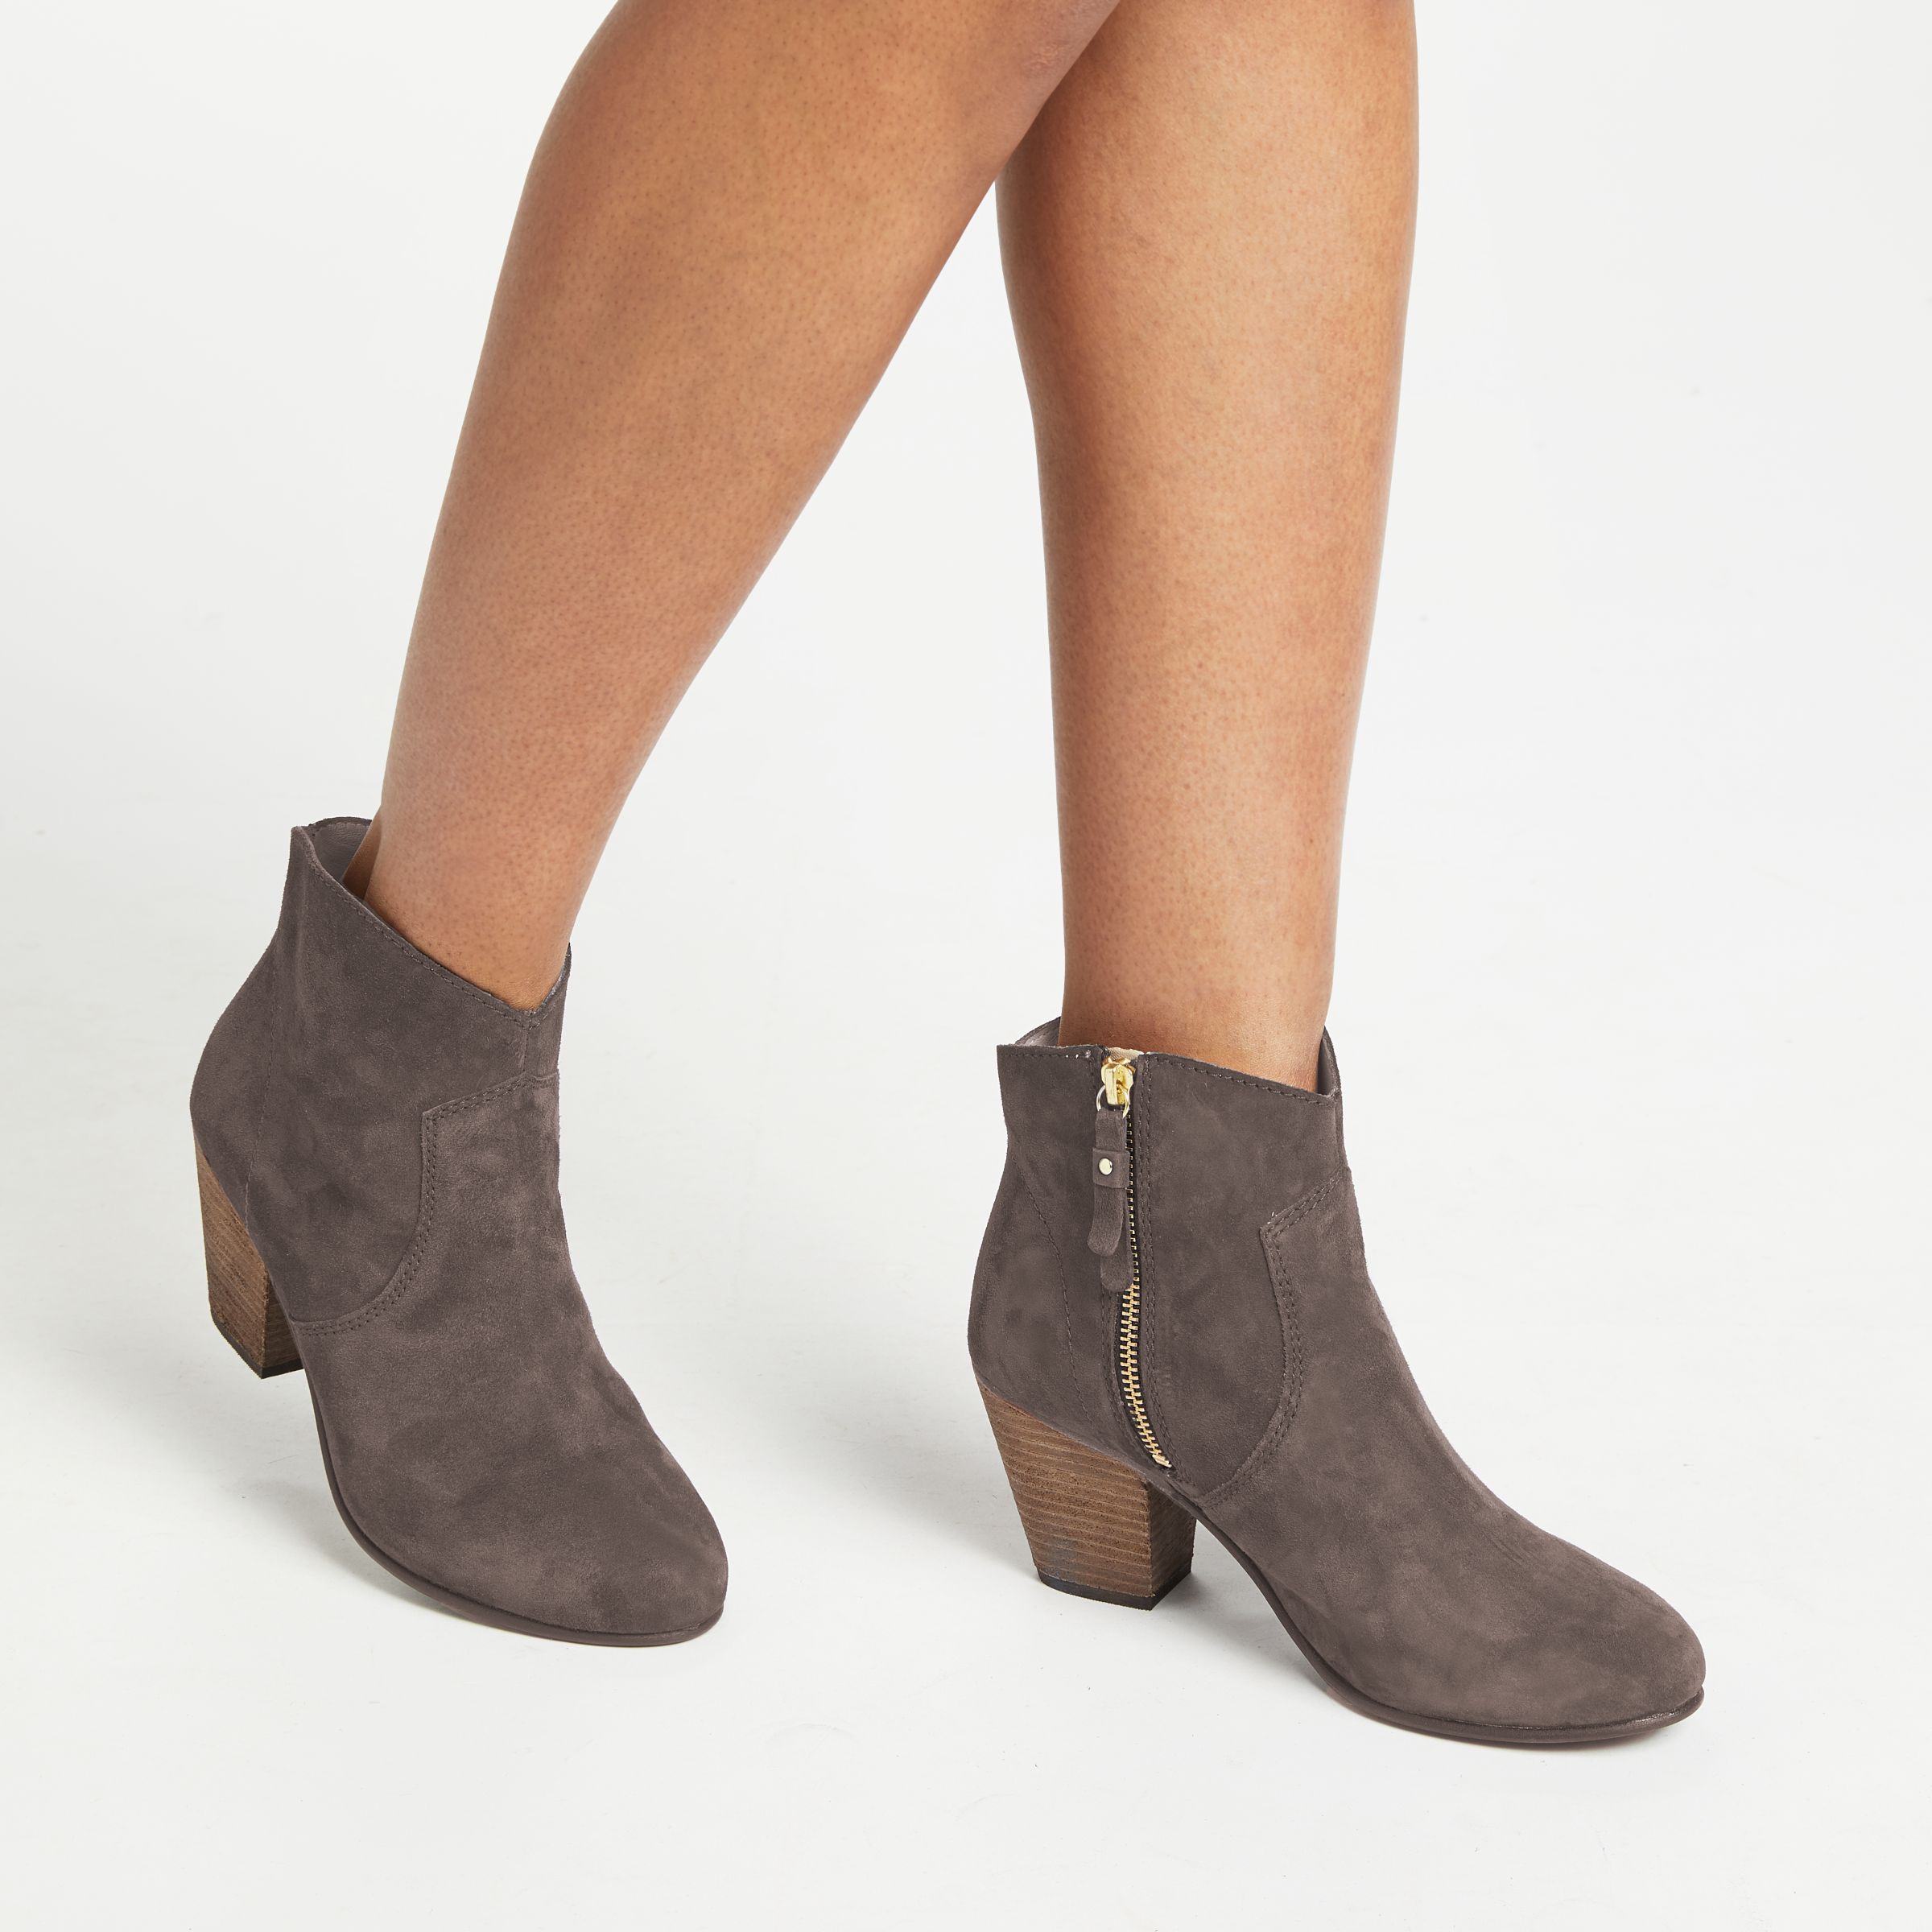 boden wedge boots